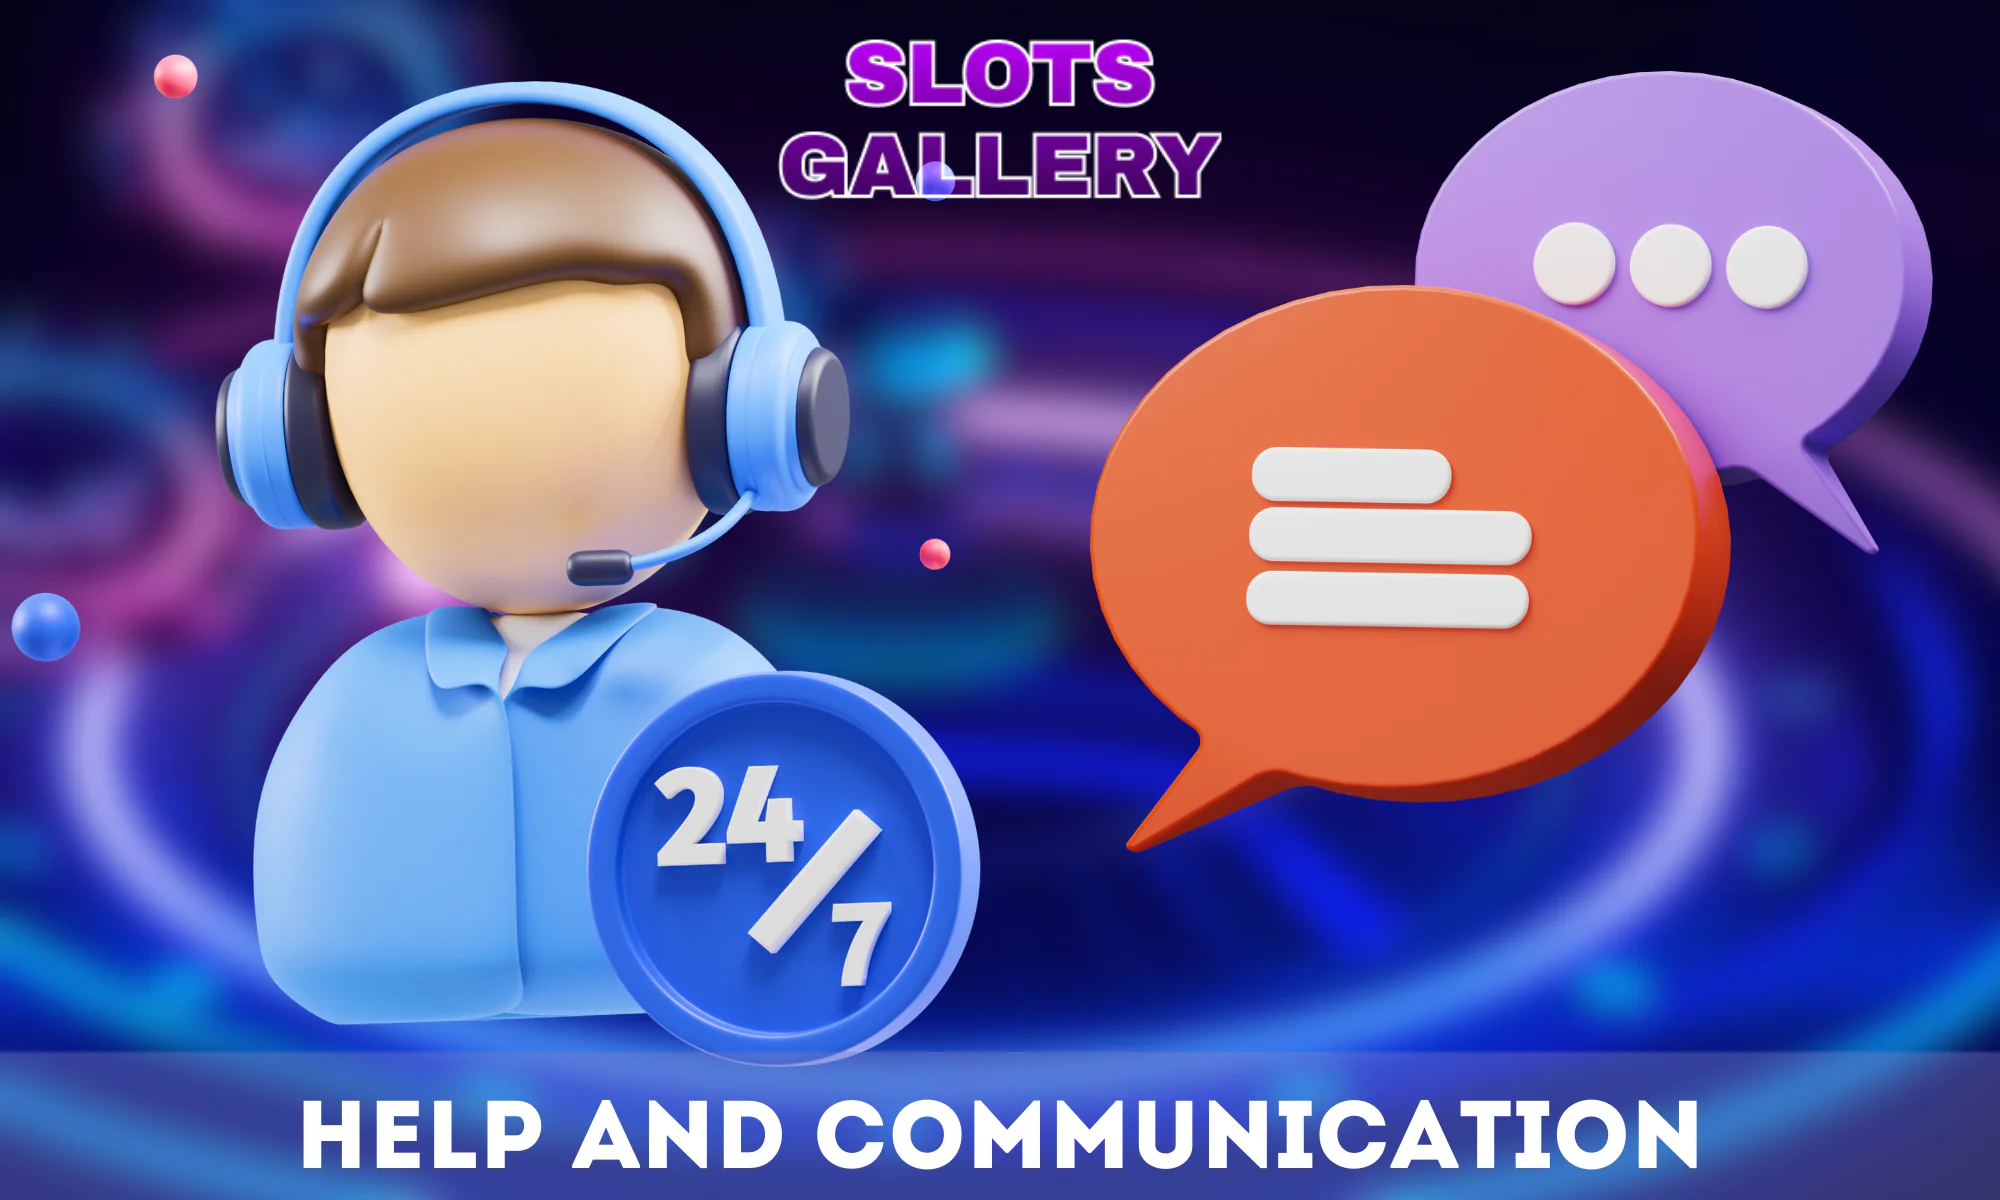 Slots Gallery has a round-the-clock customer support service to solve all problems quickly and efficiently